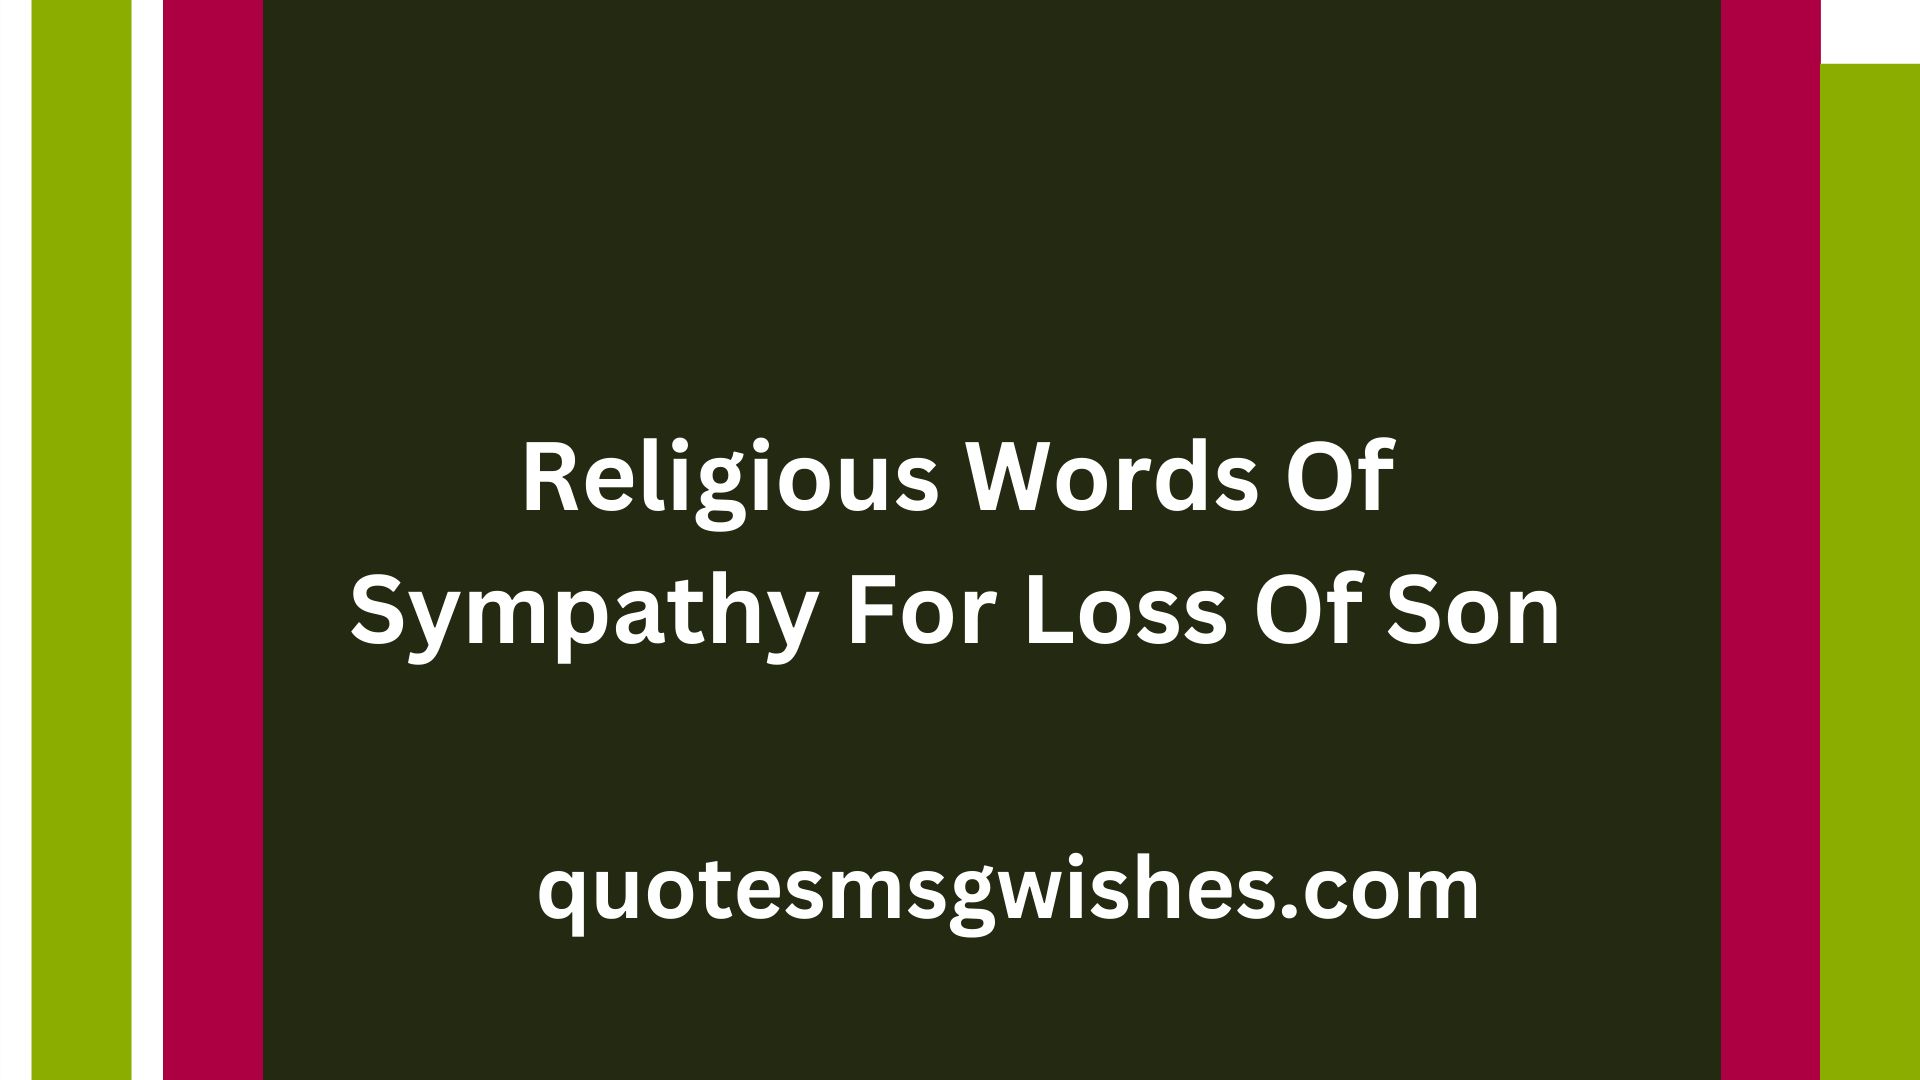 Religious Words Of Sympathy For Loss Of Son